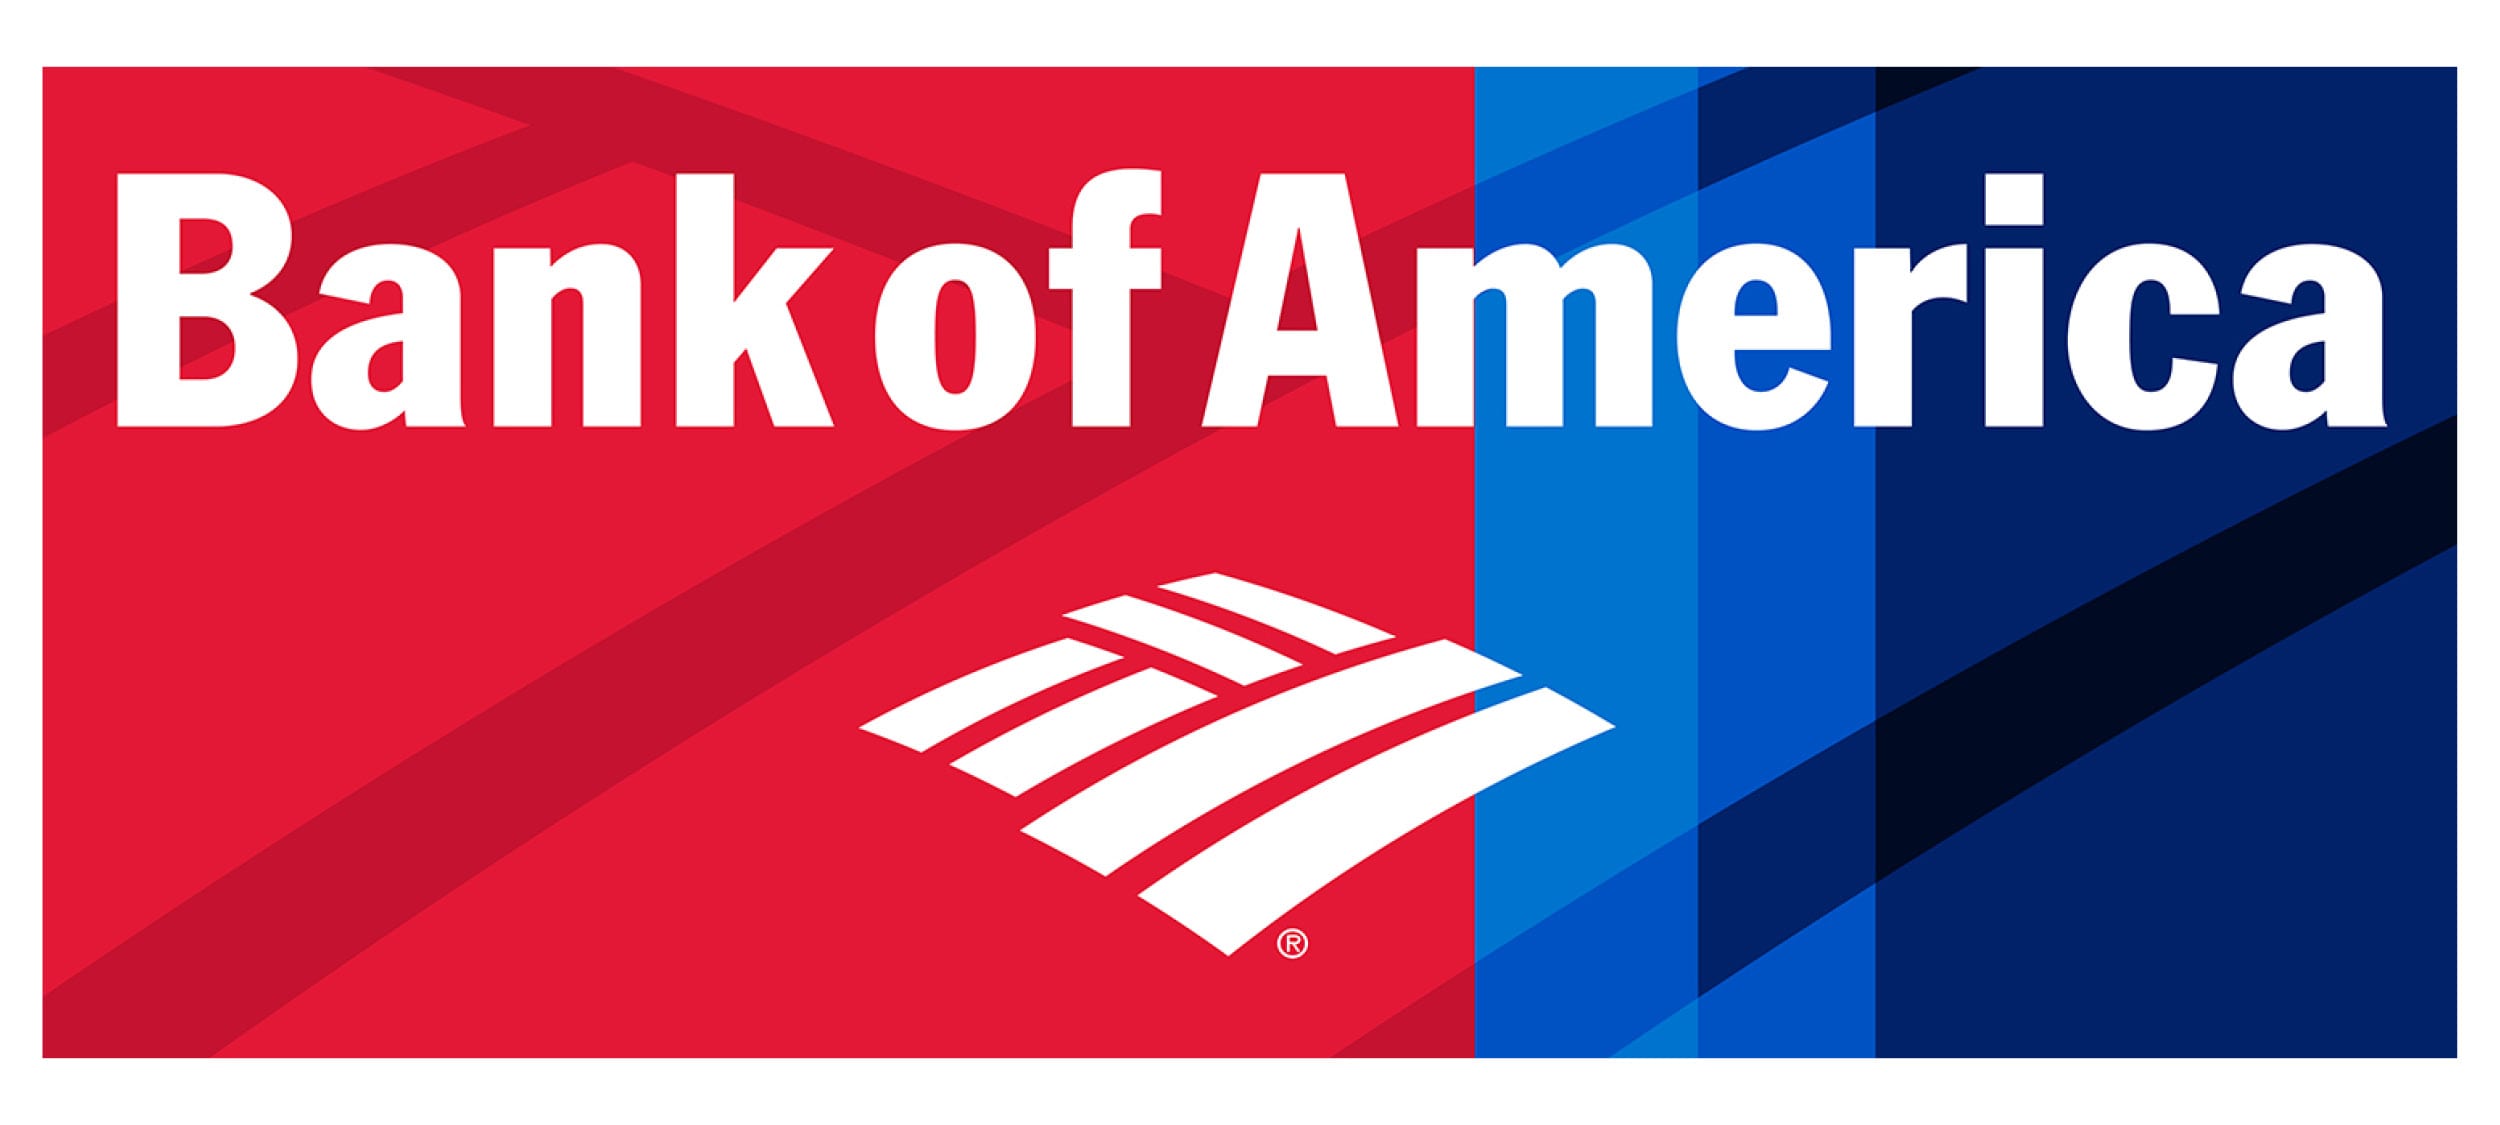 SCVNews.com | Bank of America Sued for California Unemployment Fraud